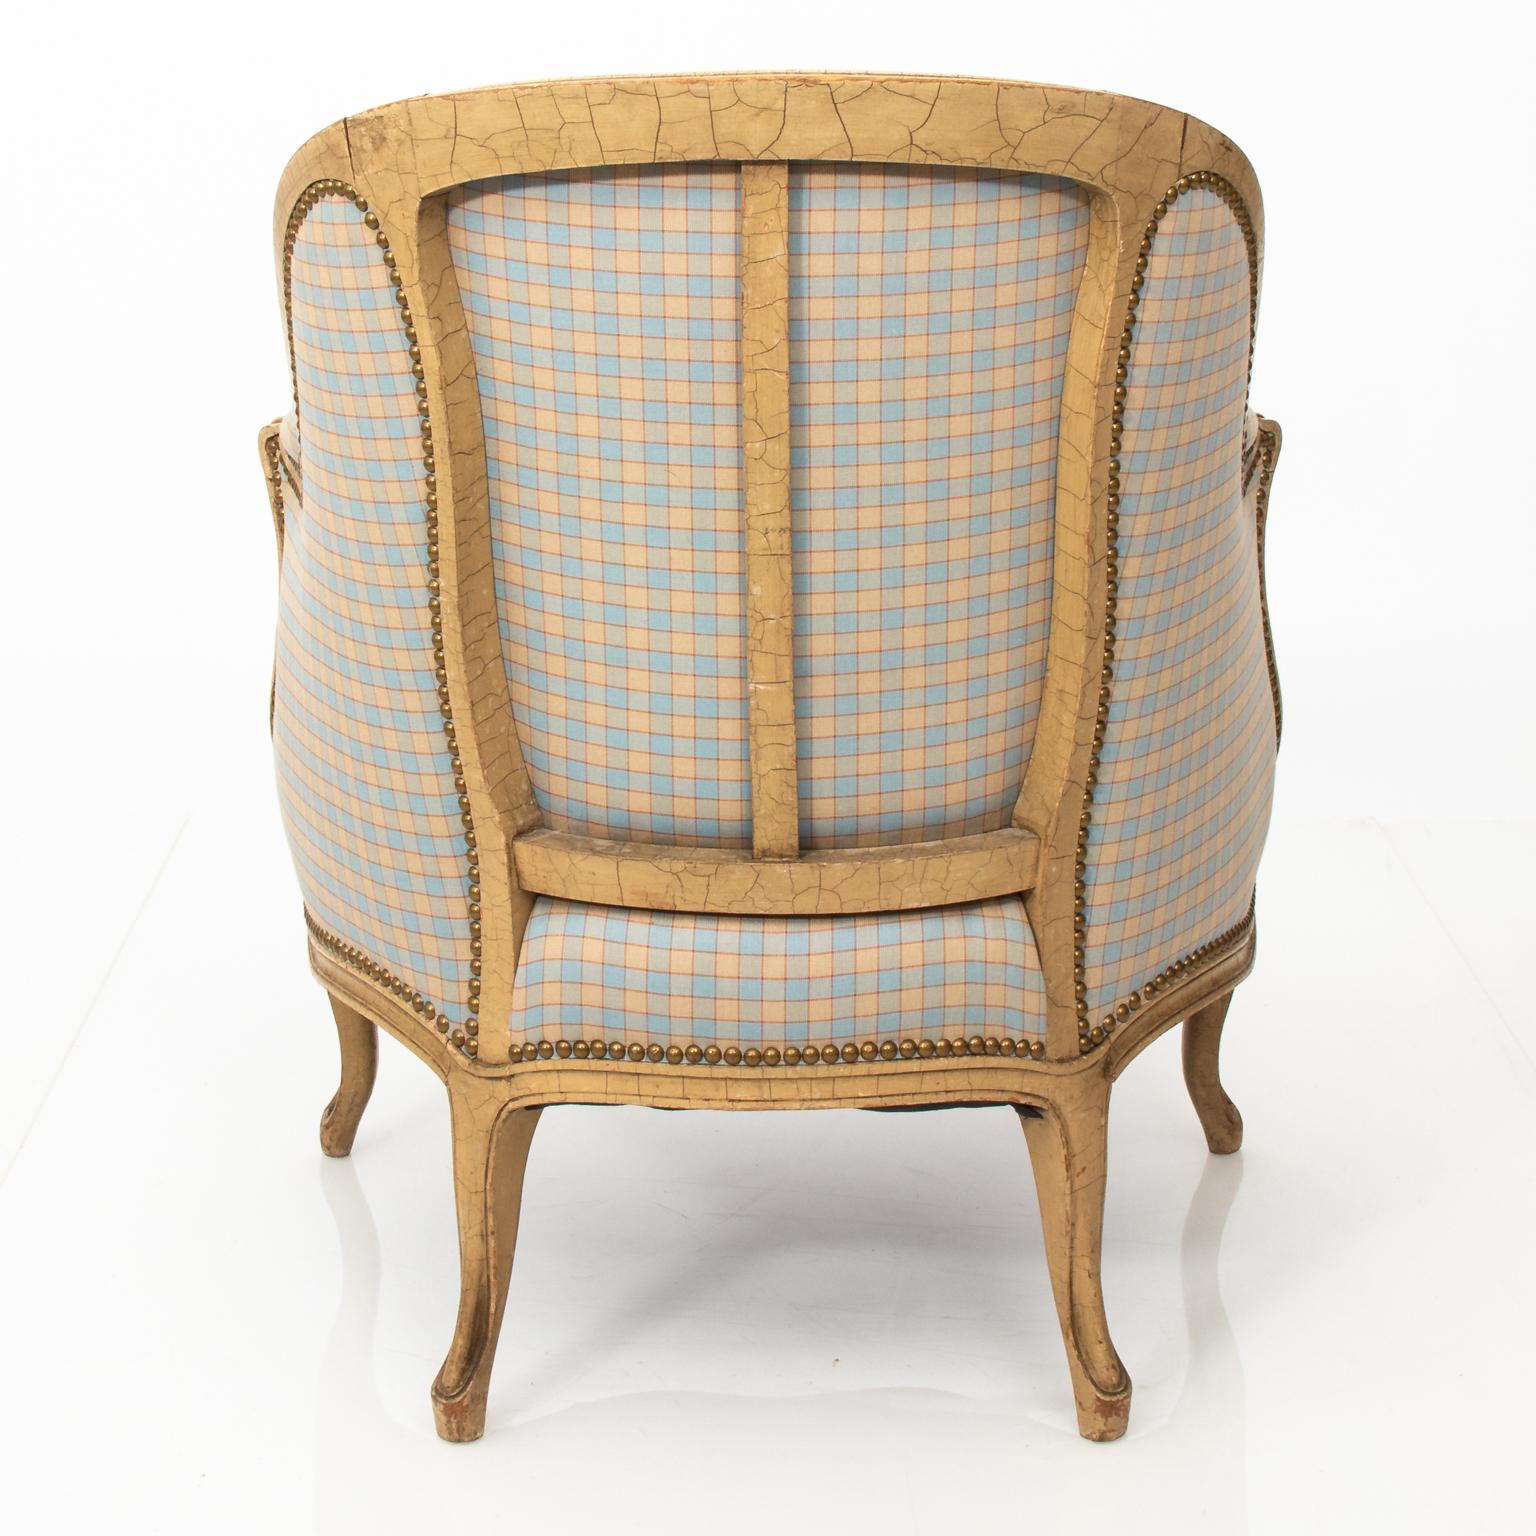 Pair of French style upholstered curved back armchairs in a check fabric with the frame in a crackled finish.